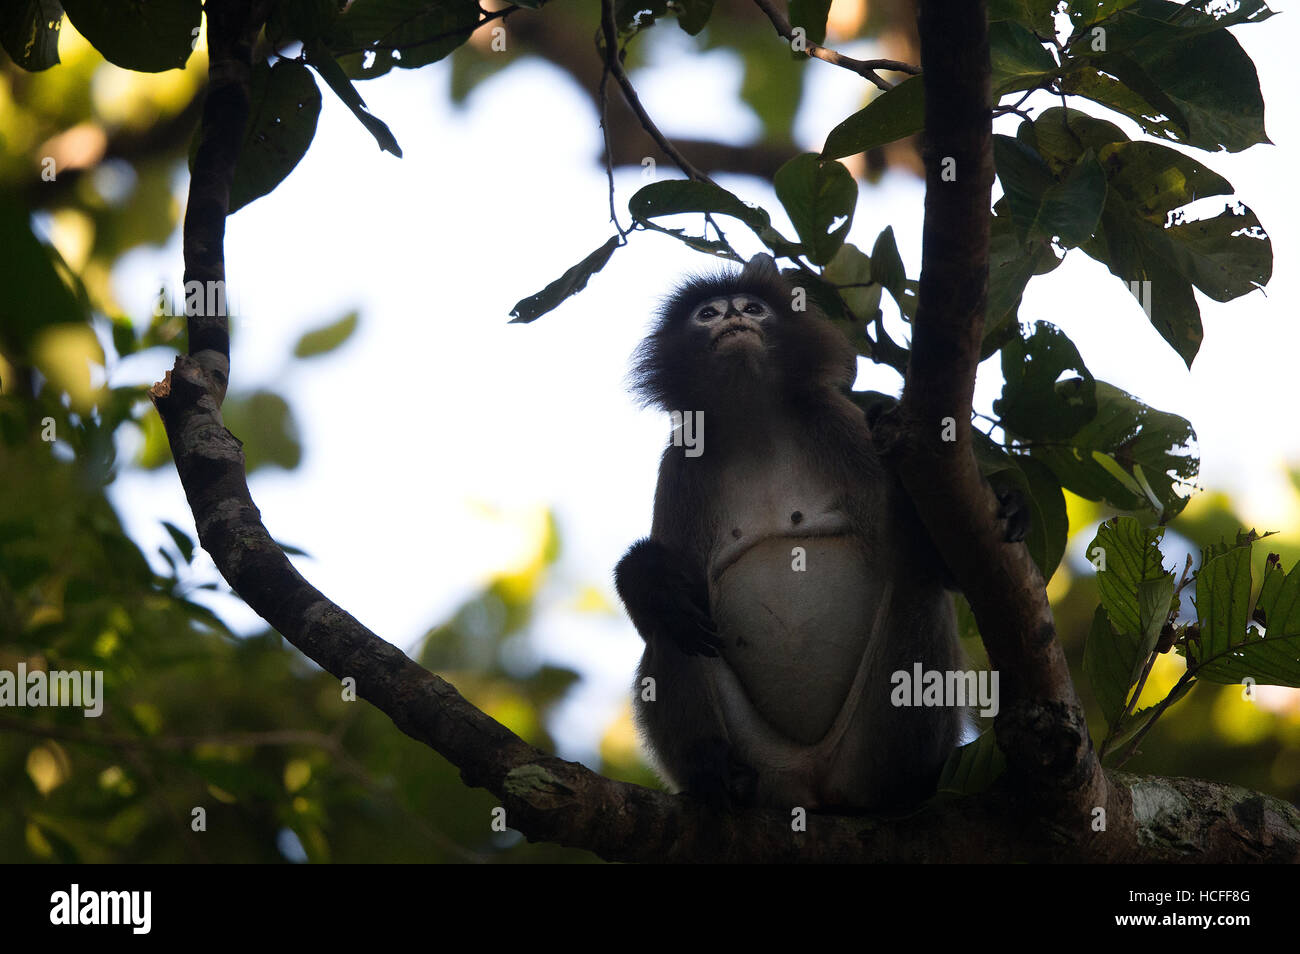 Phyr's leaf monkey or spectacled macaque or spectacled langur in the wild in Tripura, India Stock Photo